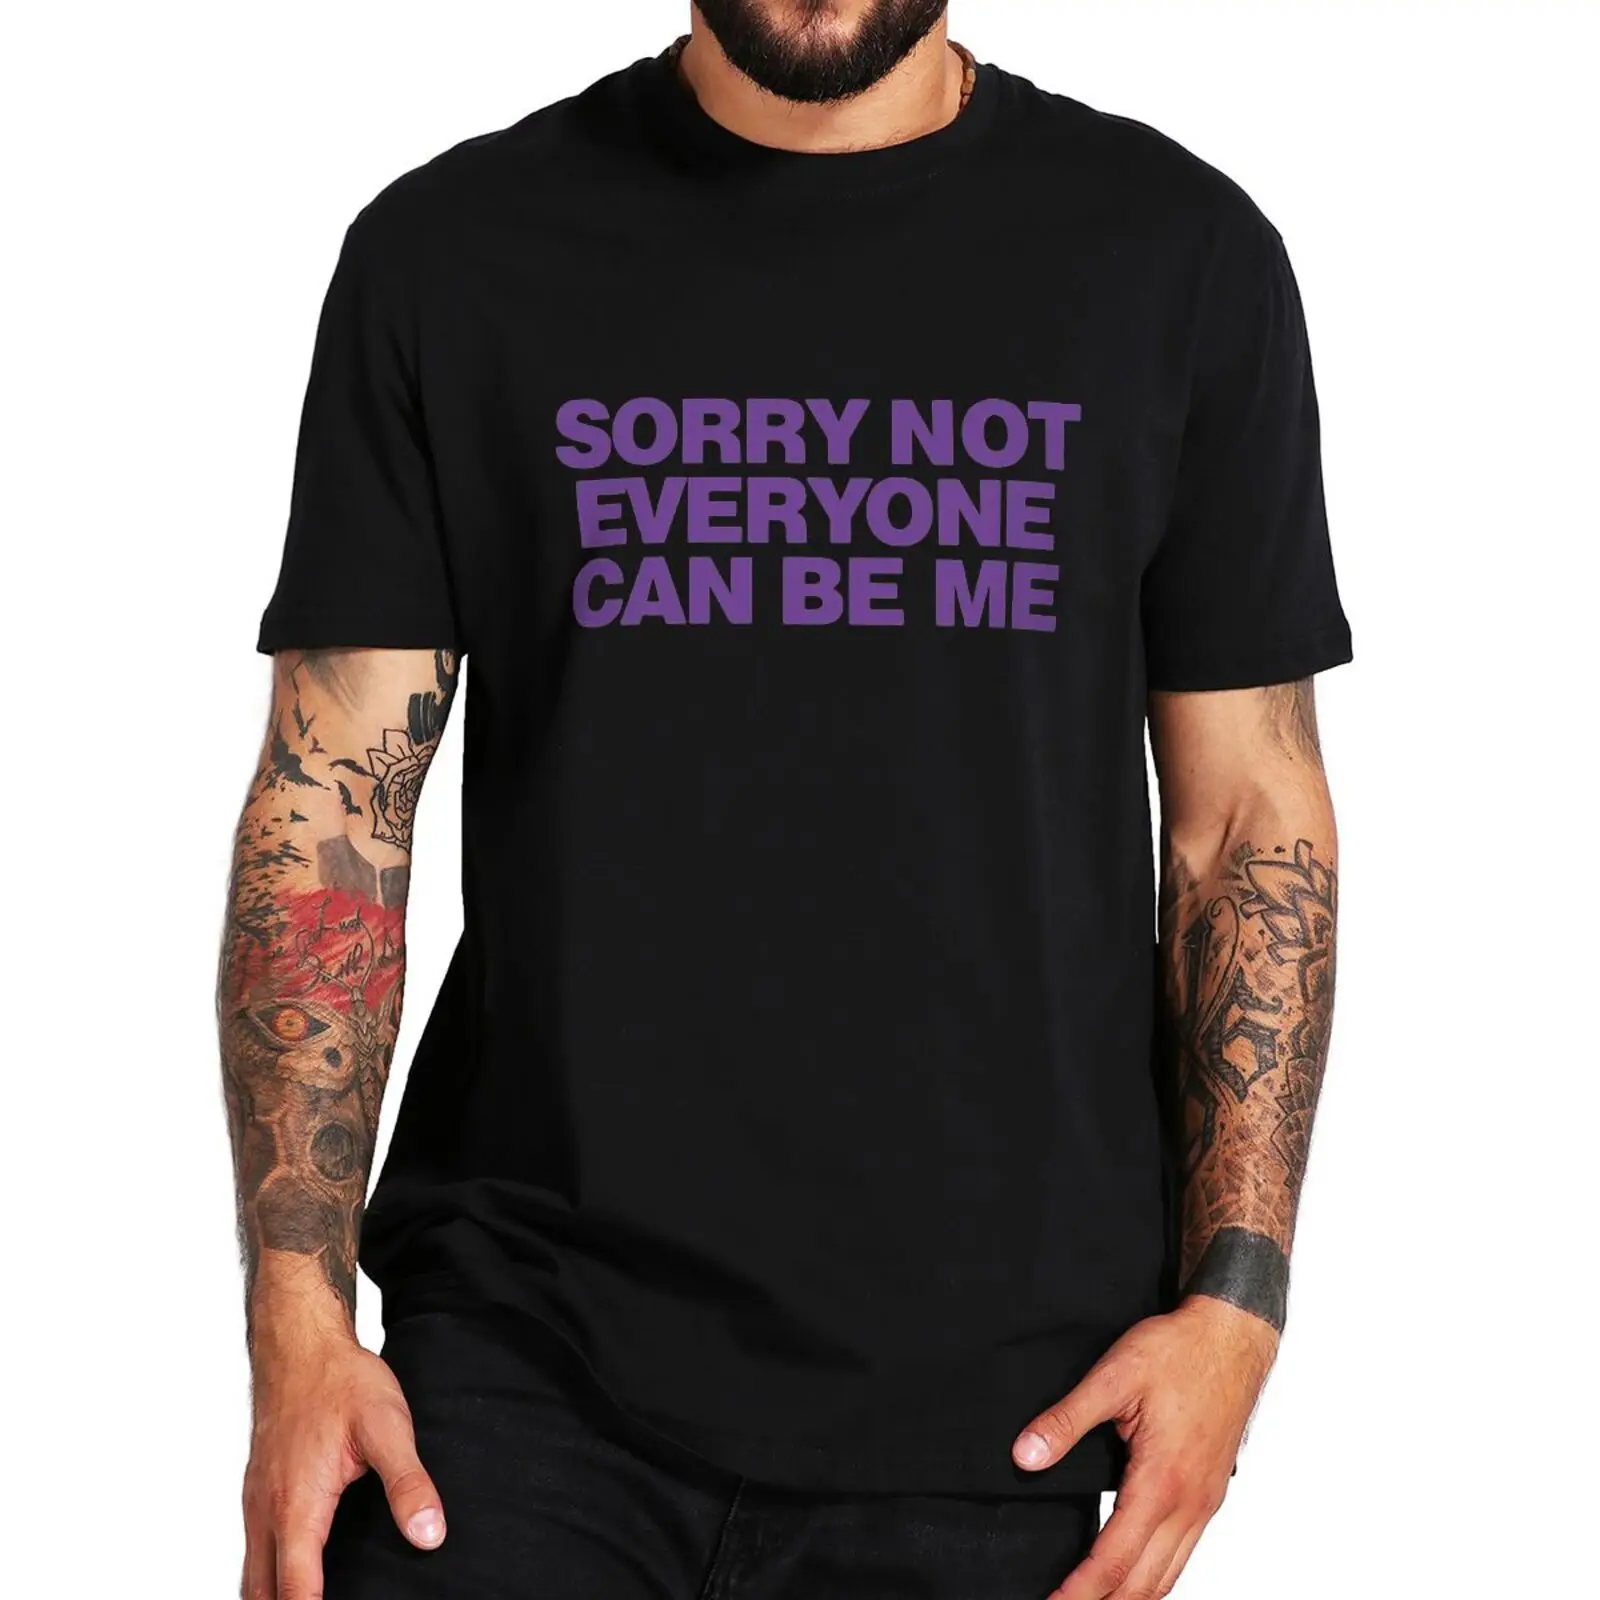 

Sorry Not Everyone Can Be Me T Shirt Funny Jokes Sarcastic Humor Short Sleeve Casual 100% Cotton Unisex EU Size Soft T-shirts